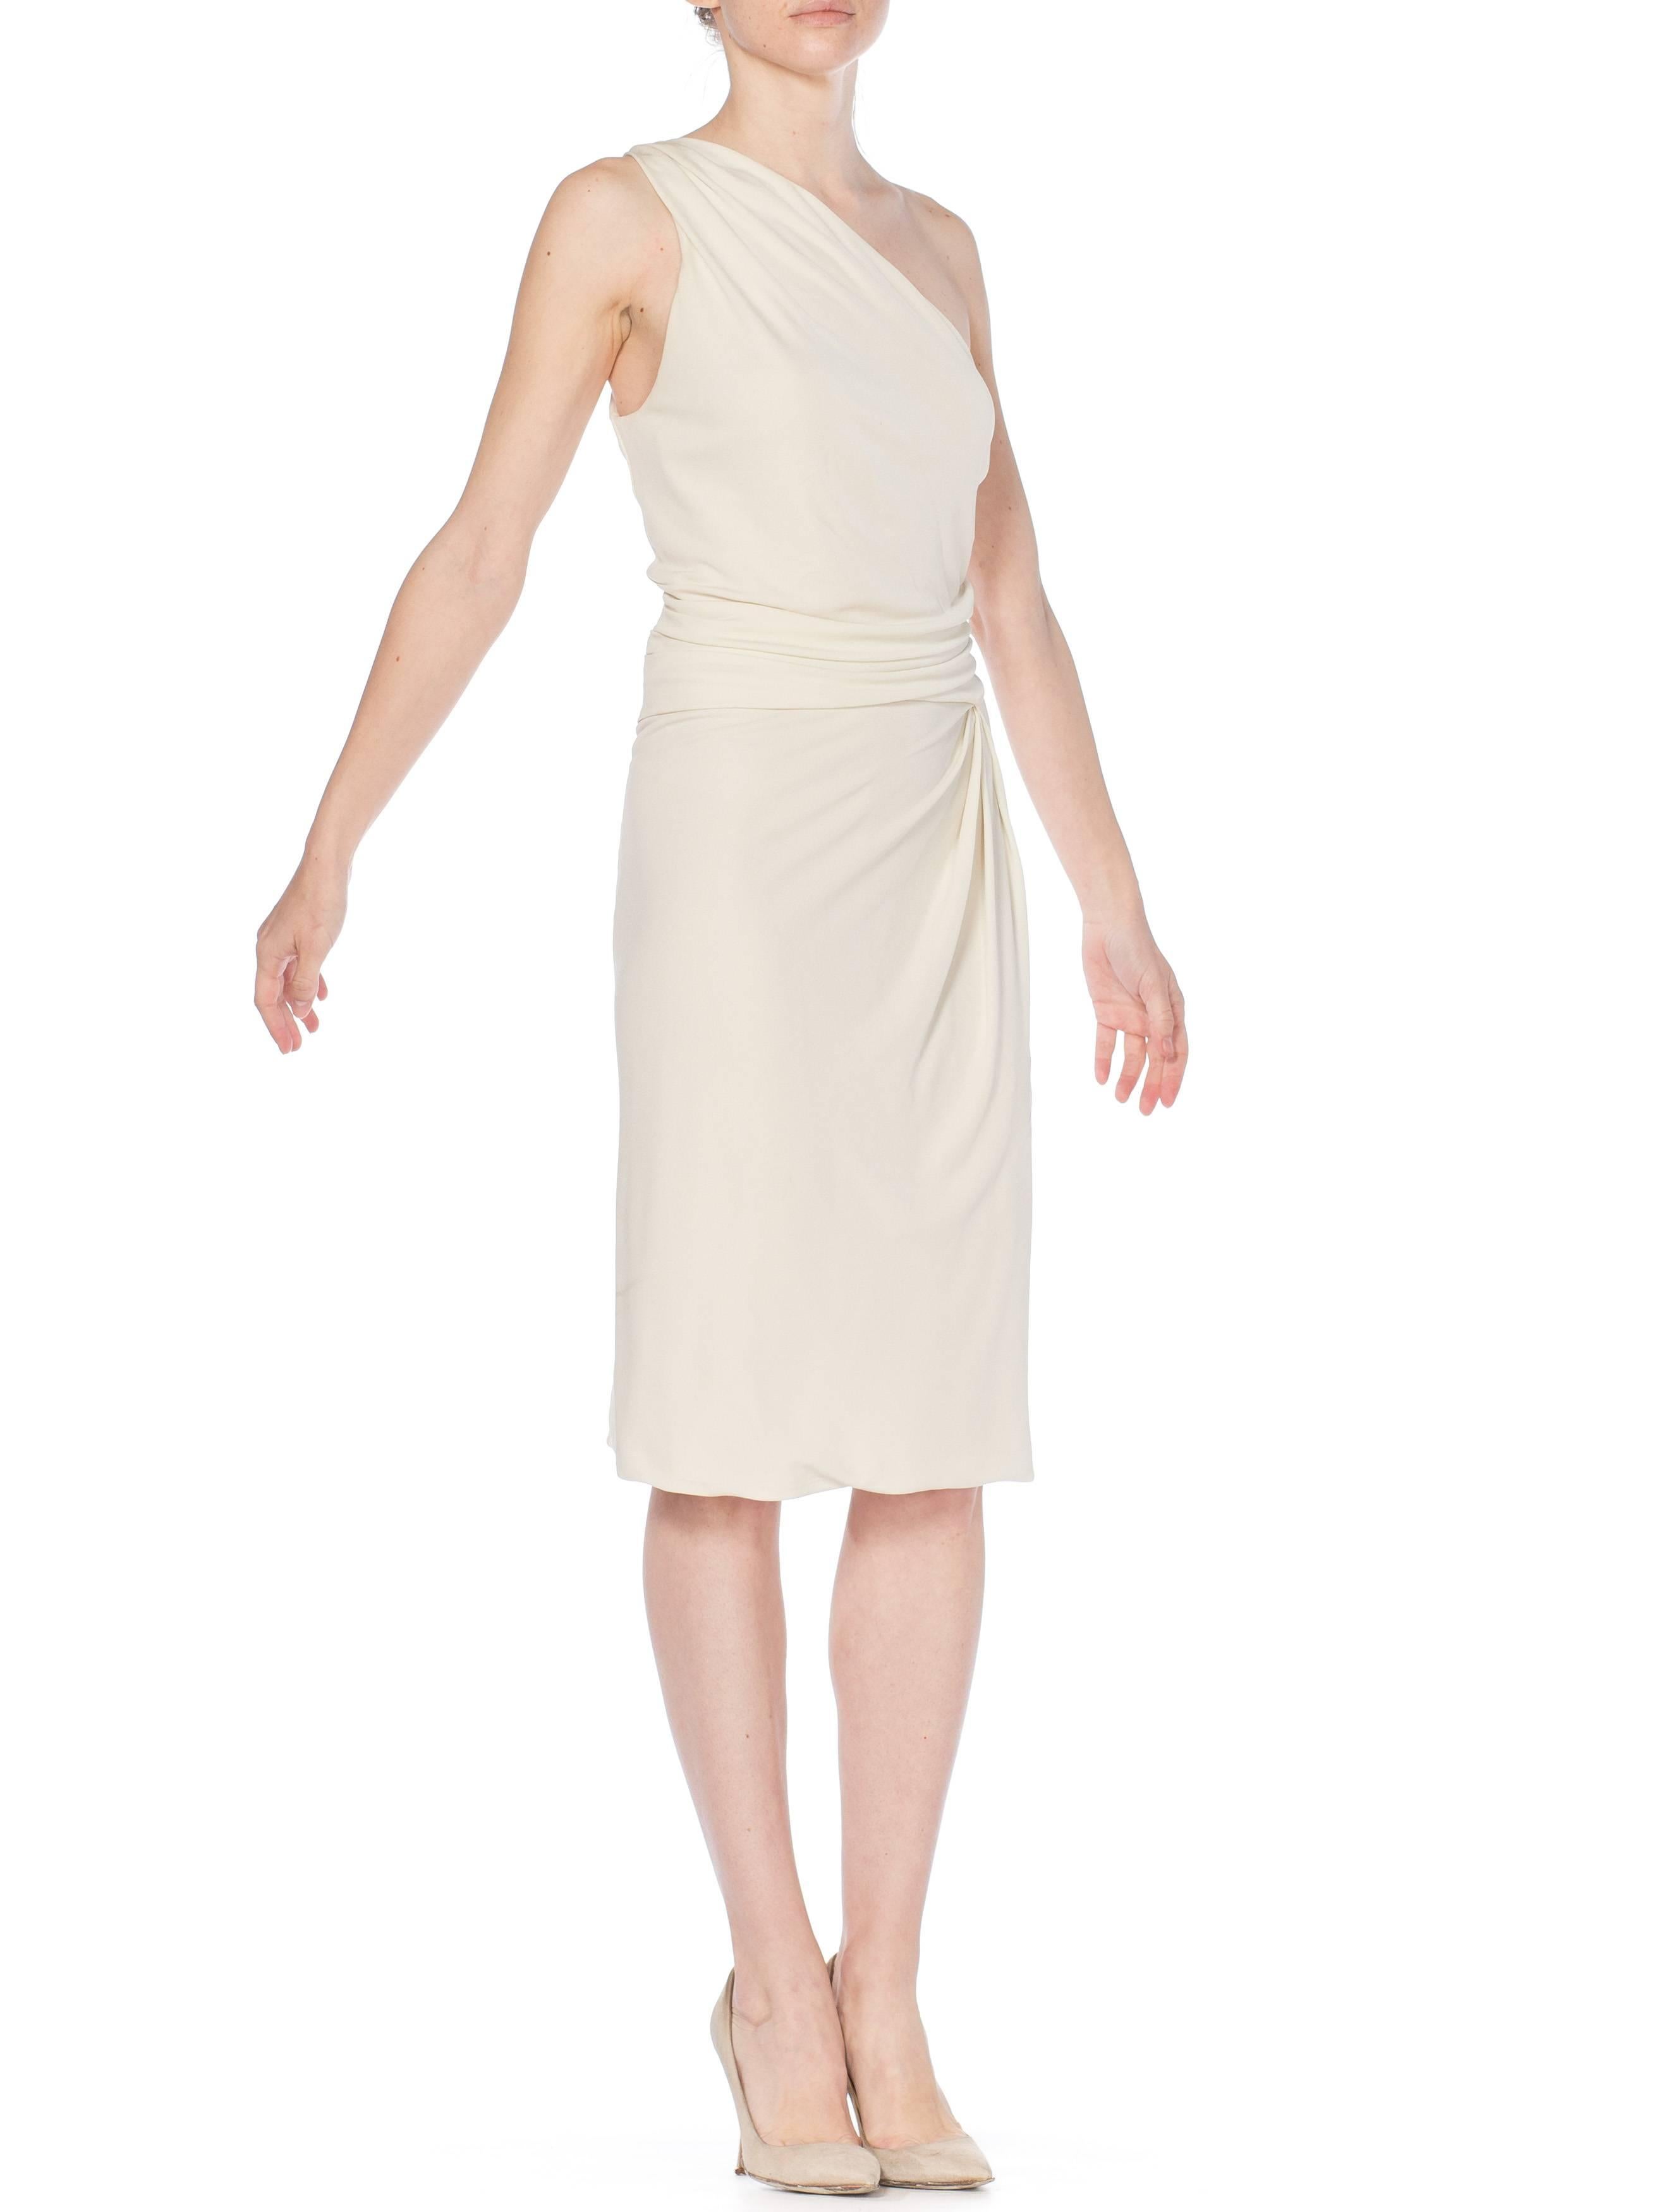 Beige 1990S TOM FORD GUCCI White Slinky Viscose Jersey One Shoulder Cocktail Dress Wi